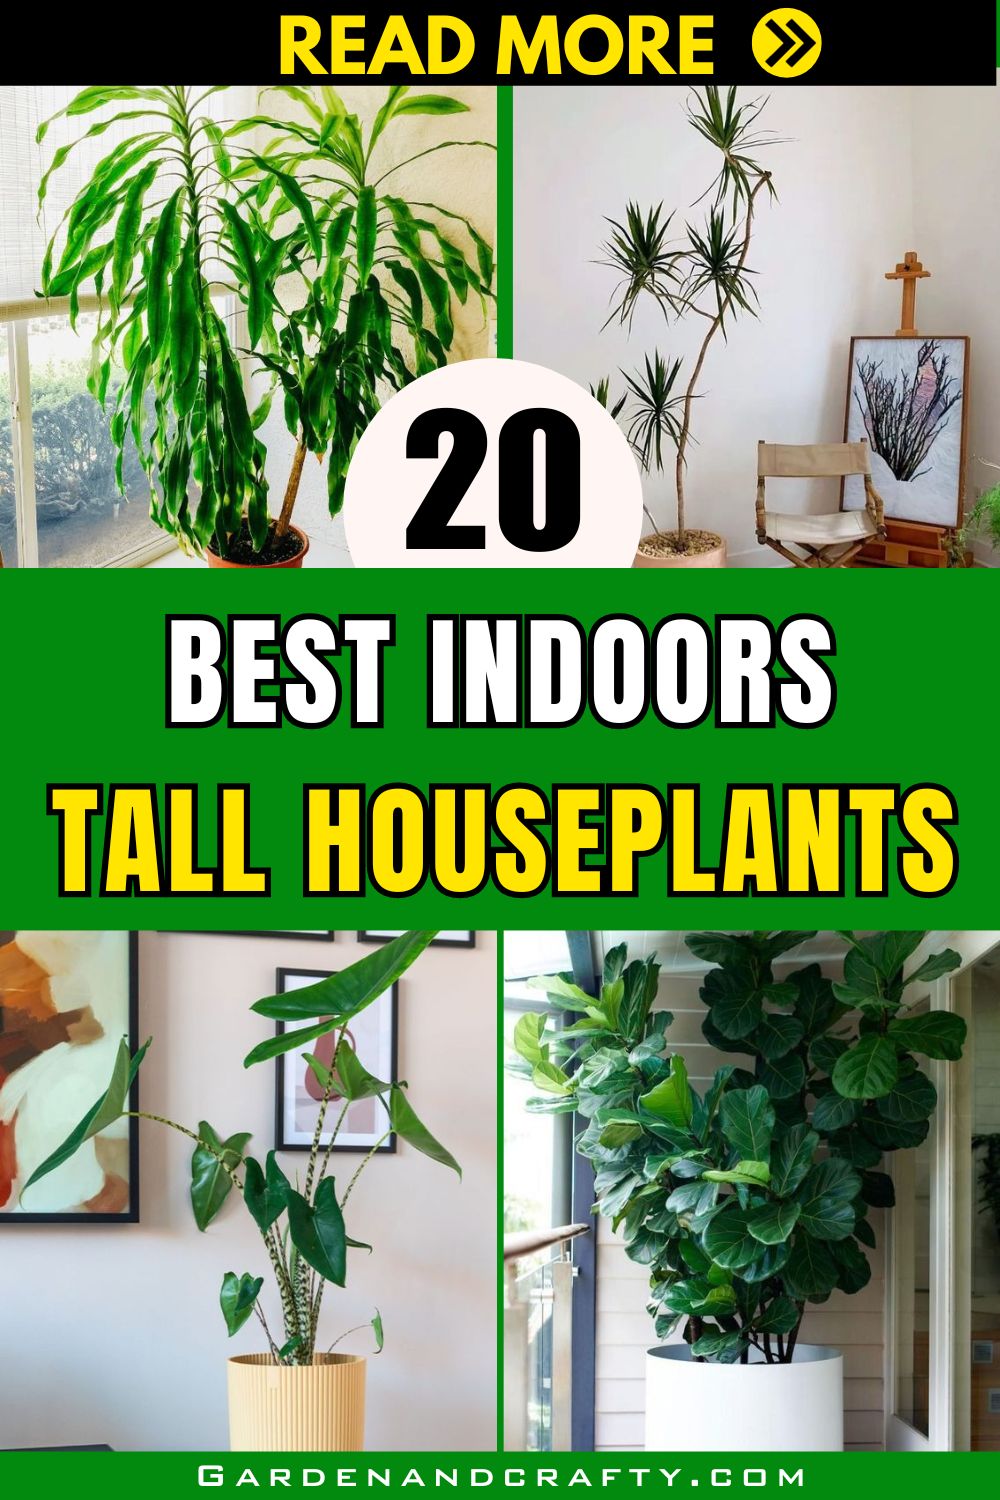 20 Tall Houseplants To Add Some Height And Drama To Your Space